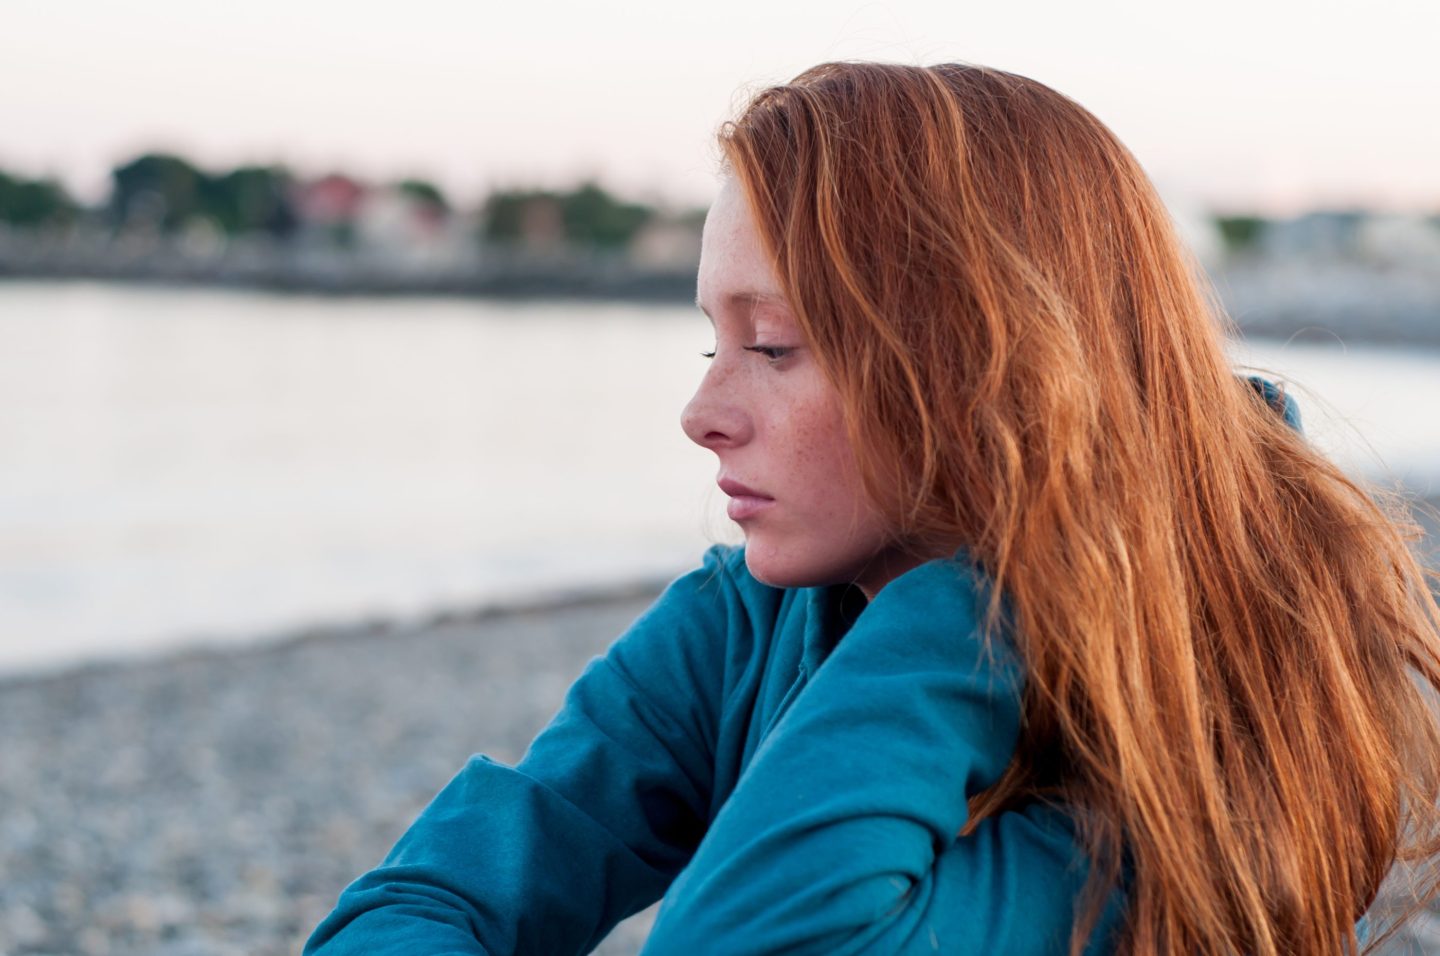 Redheaded teenager in a blue shirt sitting at the ocean and looking contemplative.